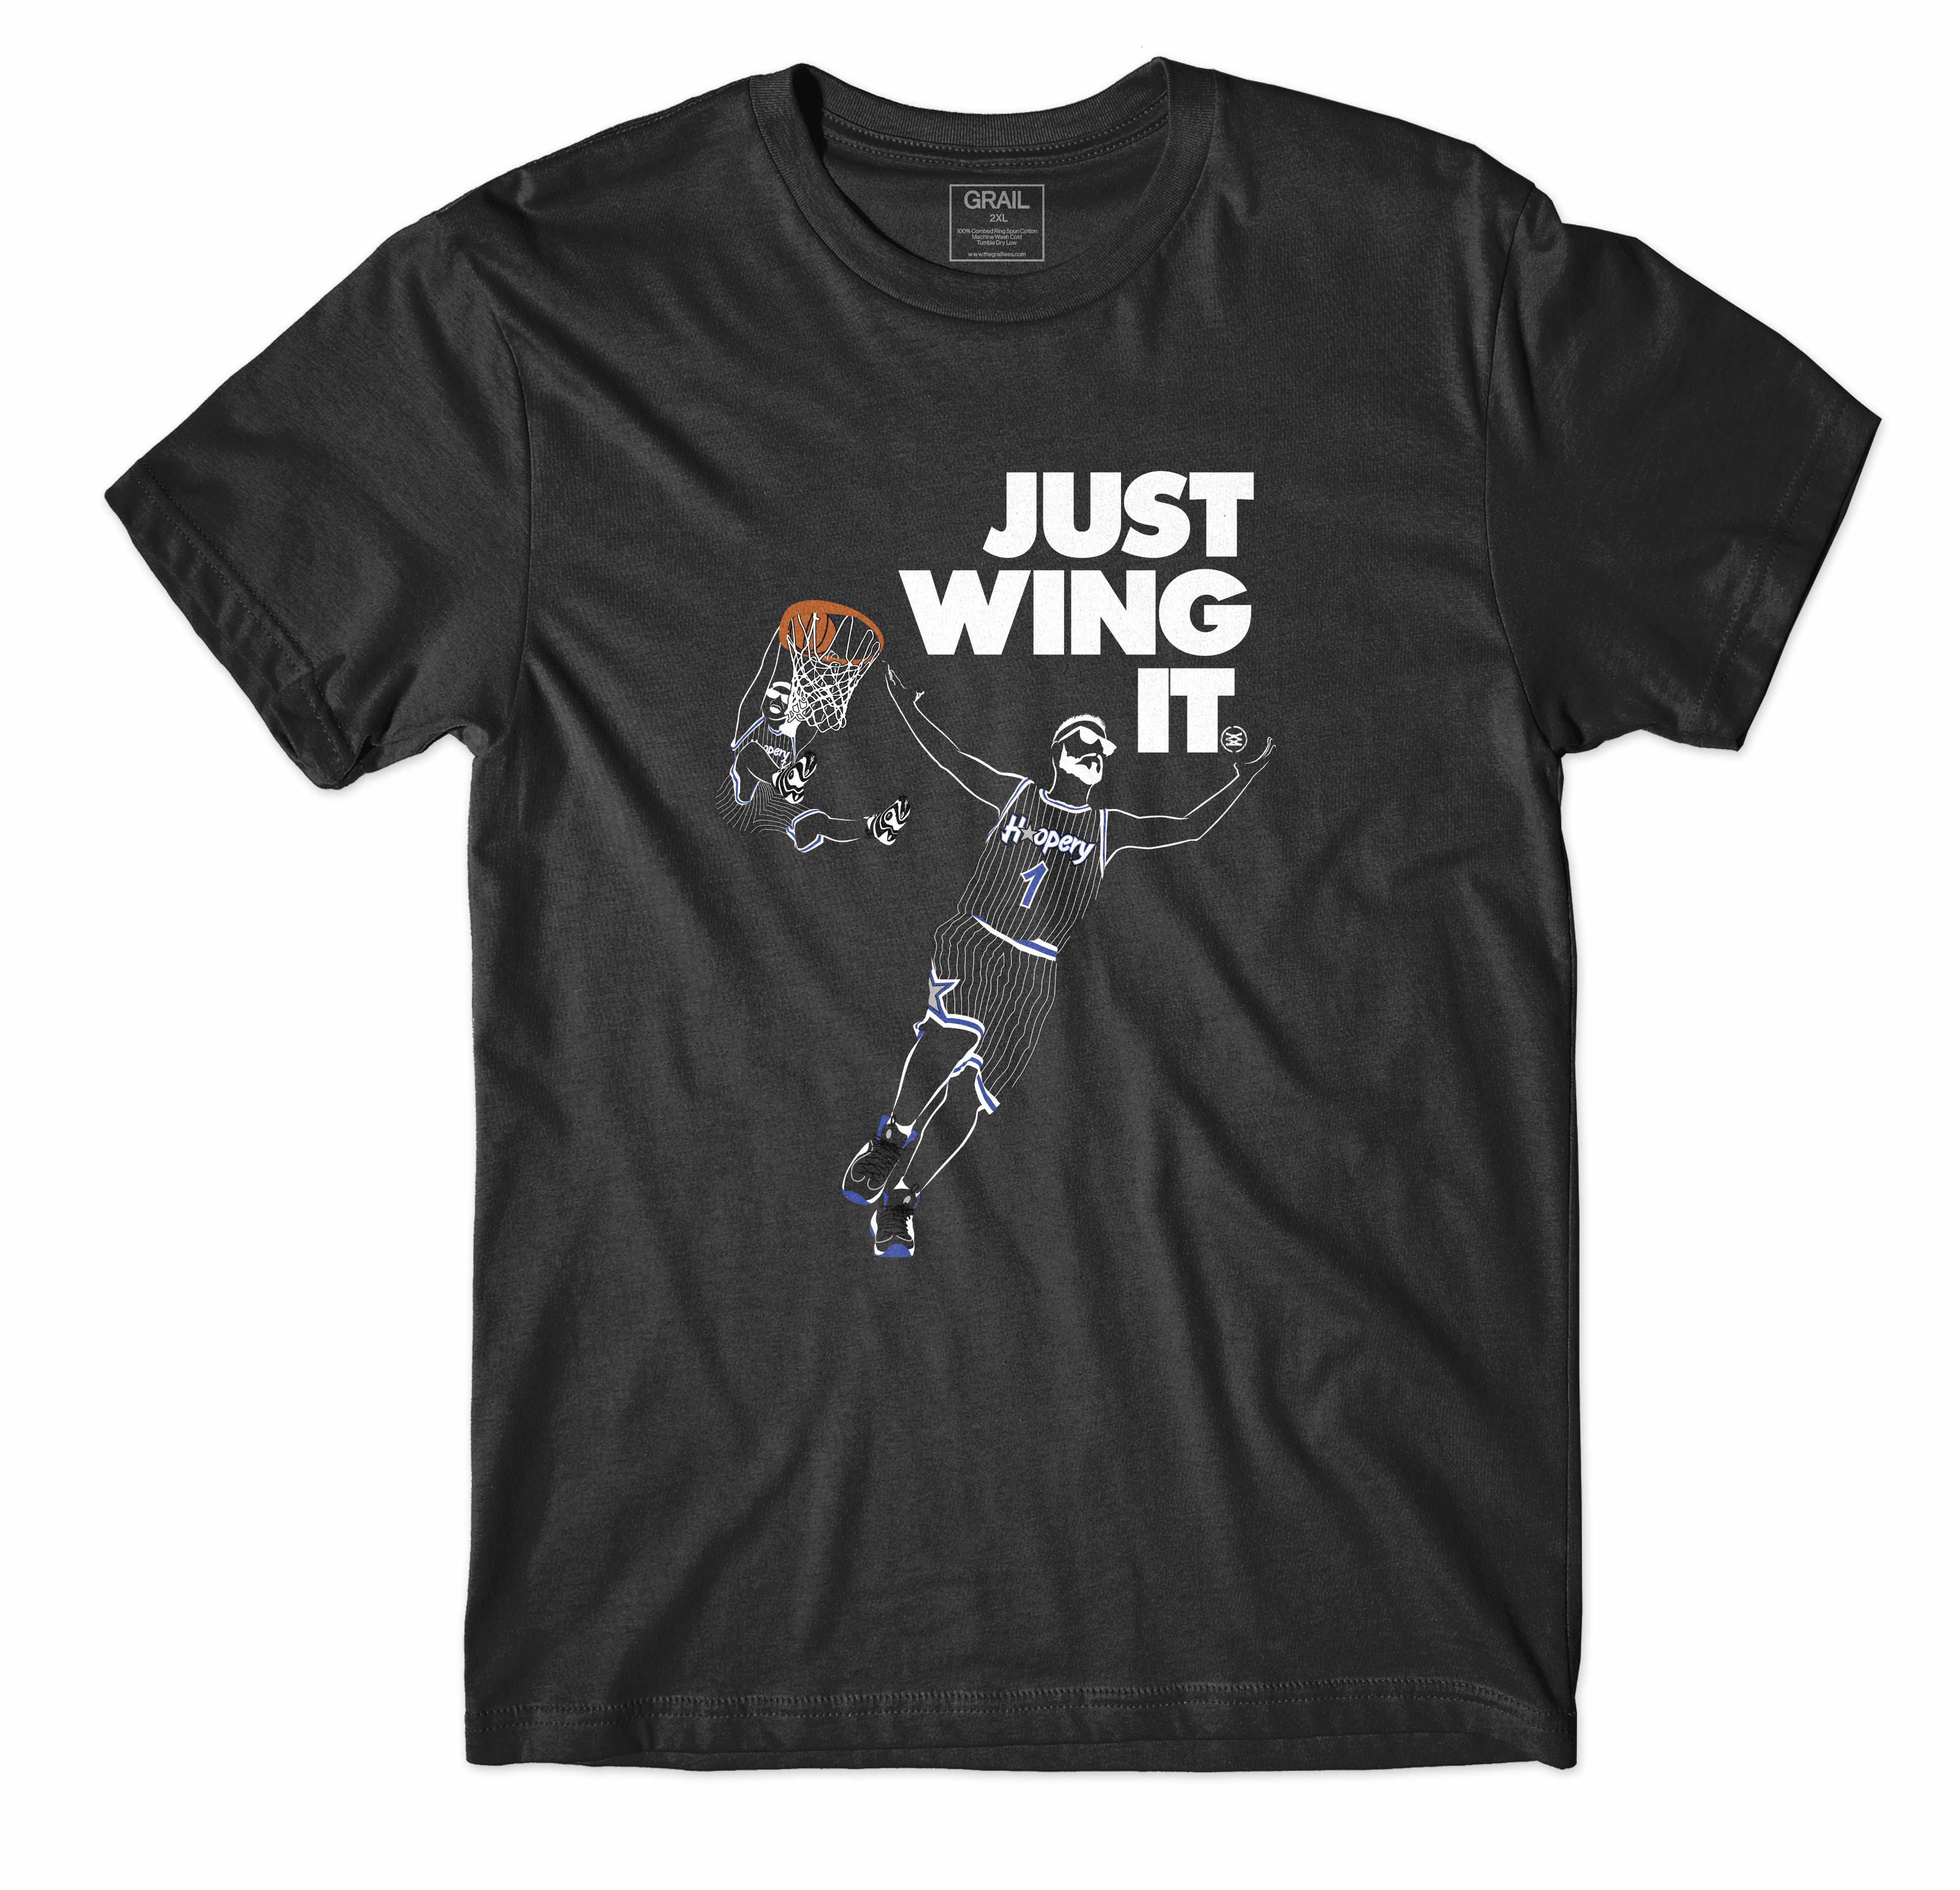 Grail X Nightwing X Hoopery Collab | Just Wing It Tee | Collaboration | Sneaker Match | Jordan Matching Outfits